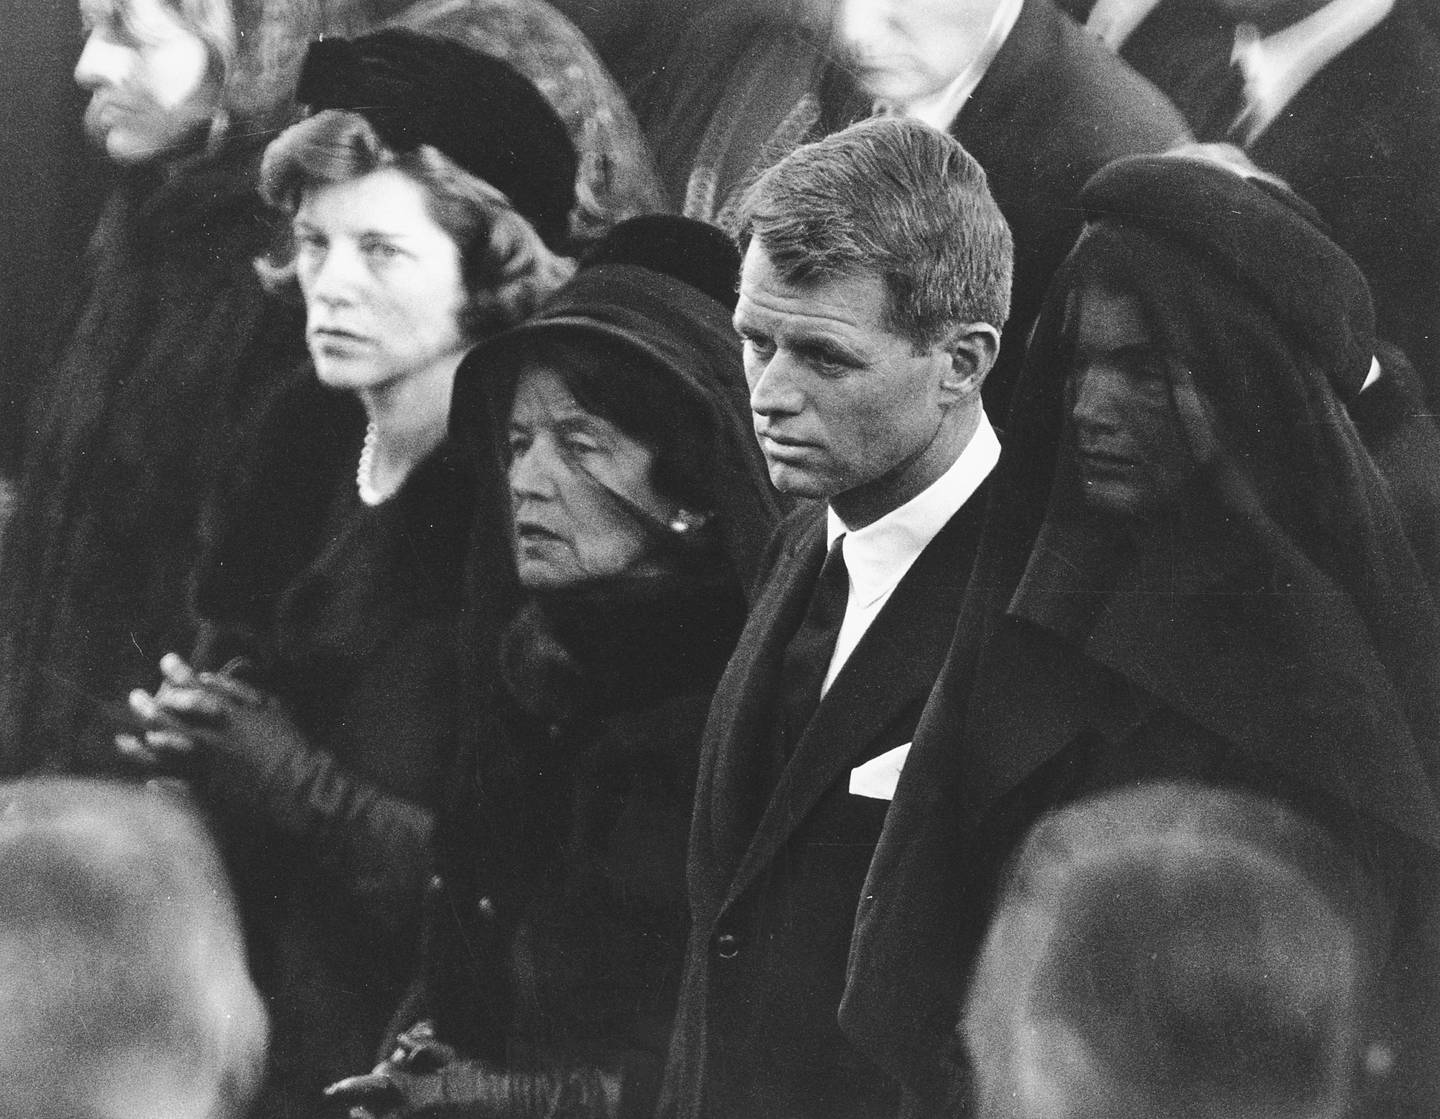 FILE - In this Nov. 25, 1963 file photo members of the Kennedy family attend U.S. President John F. Kennedy's burial at Arlington National Cemetery in Arlington, Va., including JFK's mother, Rose Kennedy, center left with veil; his brother U.S. Attorney General Robert F. Kennedy, center right; and the president's widowed wife, Jacqueline Kennedy, far right. Robert F. Nearly 50 years after Robert F. Kennedy's assassination, a new documentary series on his life and transformation into a liberal hero is coming to Netflix. "Bobby Kennedy for President" produced by RadicalMedia, Trilogy Films and LooksFilm launches Friday, April 27, 2018, on Netflix. (AP Photo, File)